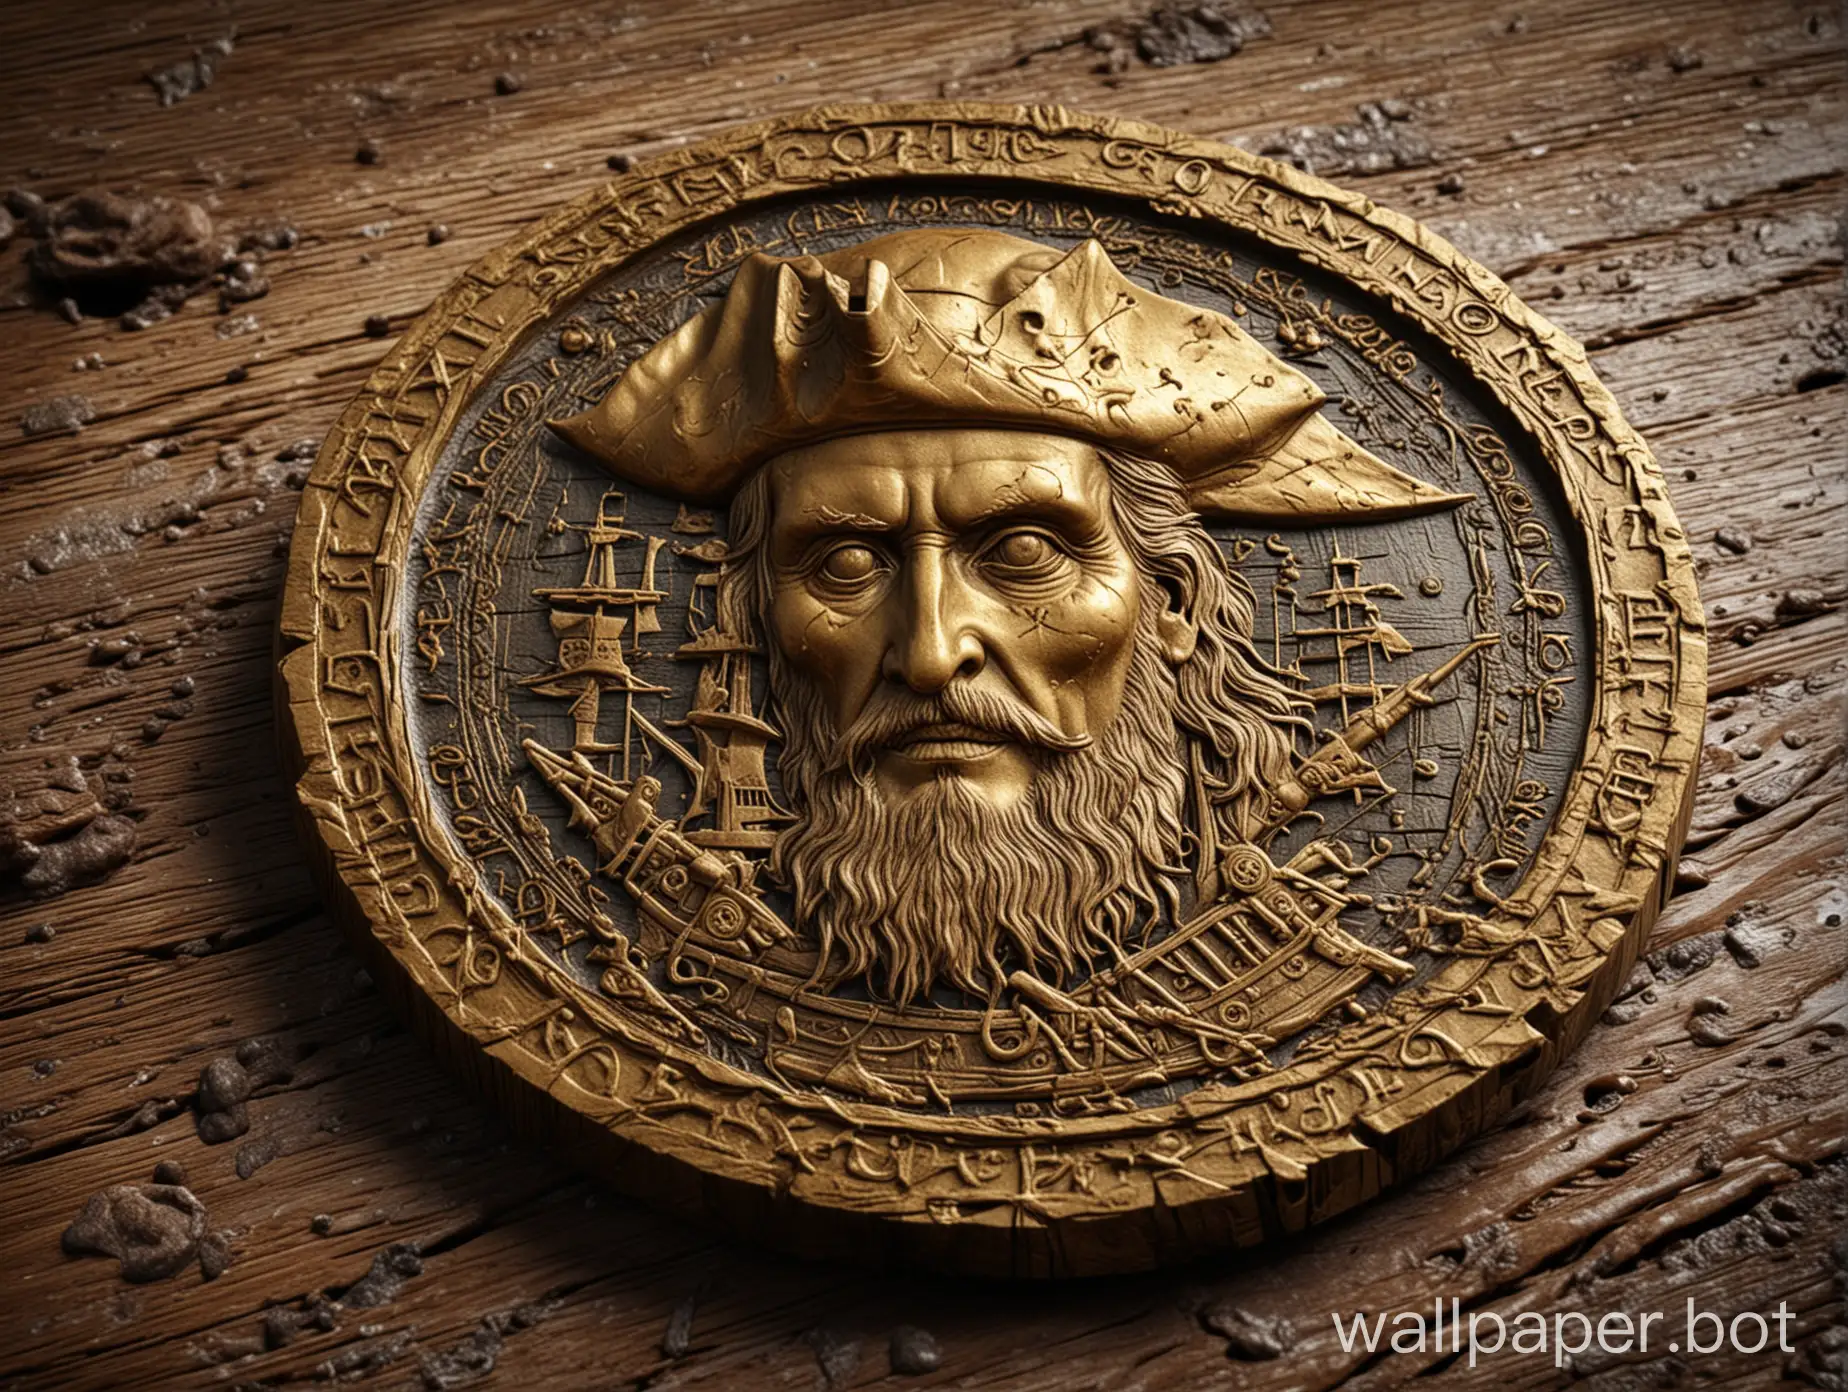 A stunning, detailed close-up illustration of an ancient pirate gold coin. The worn and weathered surface of the coin reveals intricate engravings and designs. The coin is set against a backdrop of wooden planks, evoking the feel of a pirate ship. The image is beautifully rendered in a mix of photography, 3D rendering, and painting techniques, creating a unique and captivating visual experience., painting, illustration, photo, 3d render